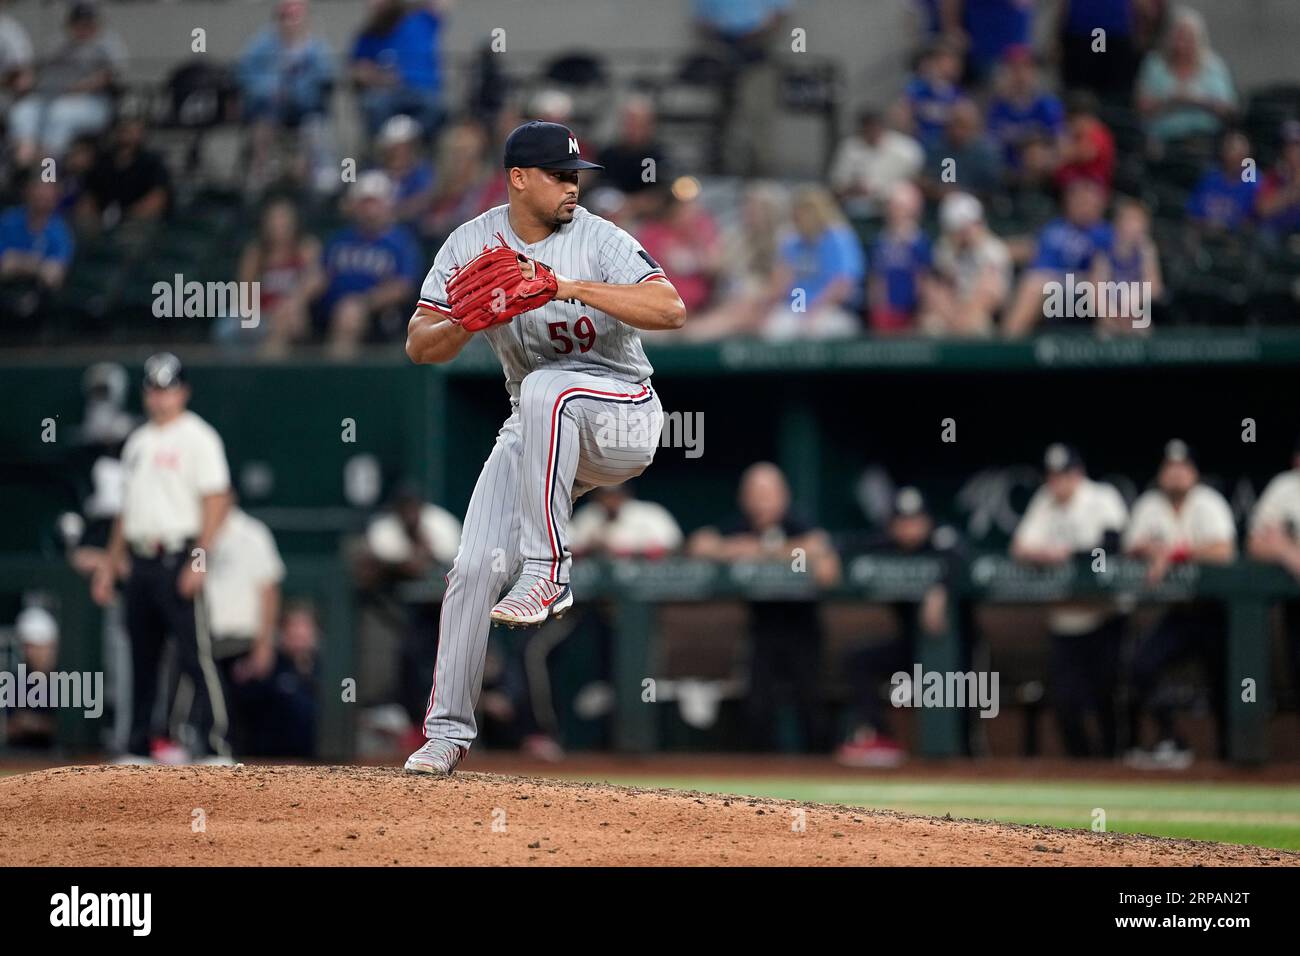 Minnesota Twins relief pitcher Jhoan Duran throws to the Cleveland  Guardians during a baseball game Tuesday, June 21, 2022, in Minneapolis.  (AP Photo/Andy Clayton-King Stock Photo - Alamy